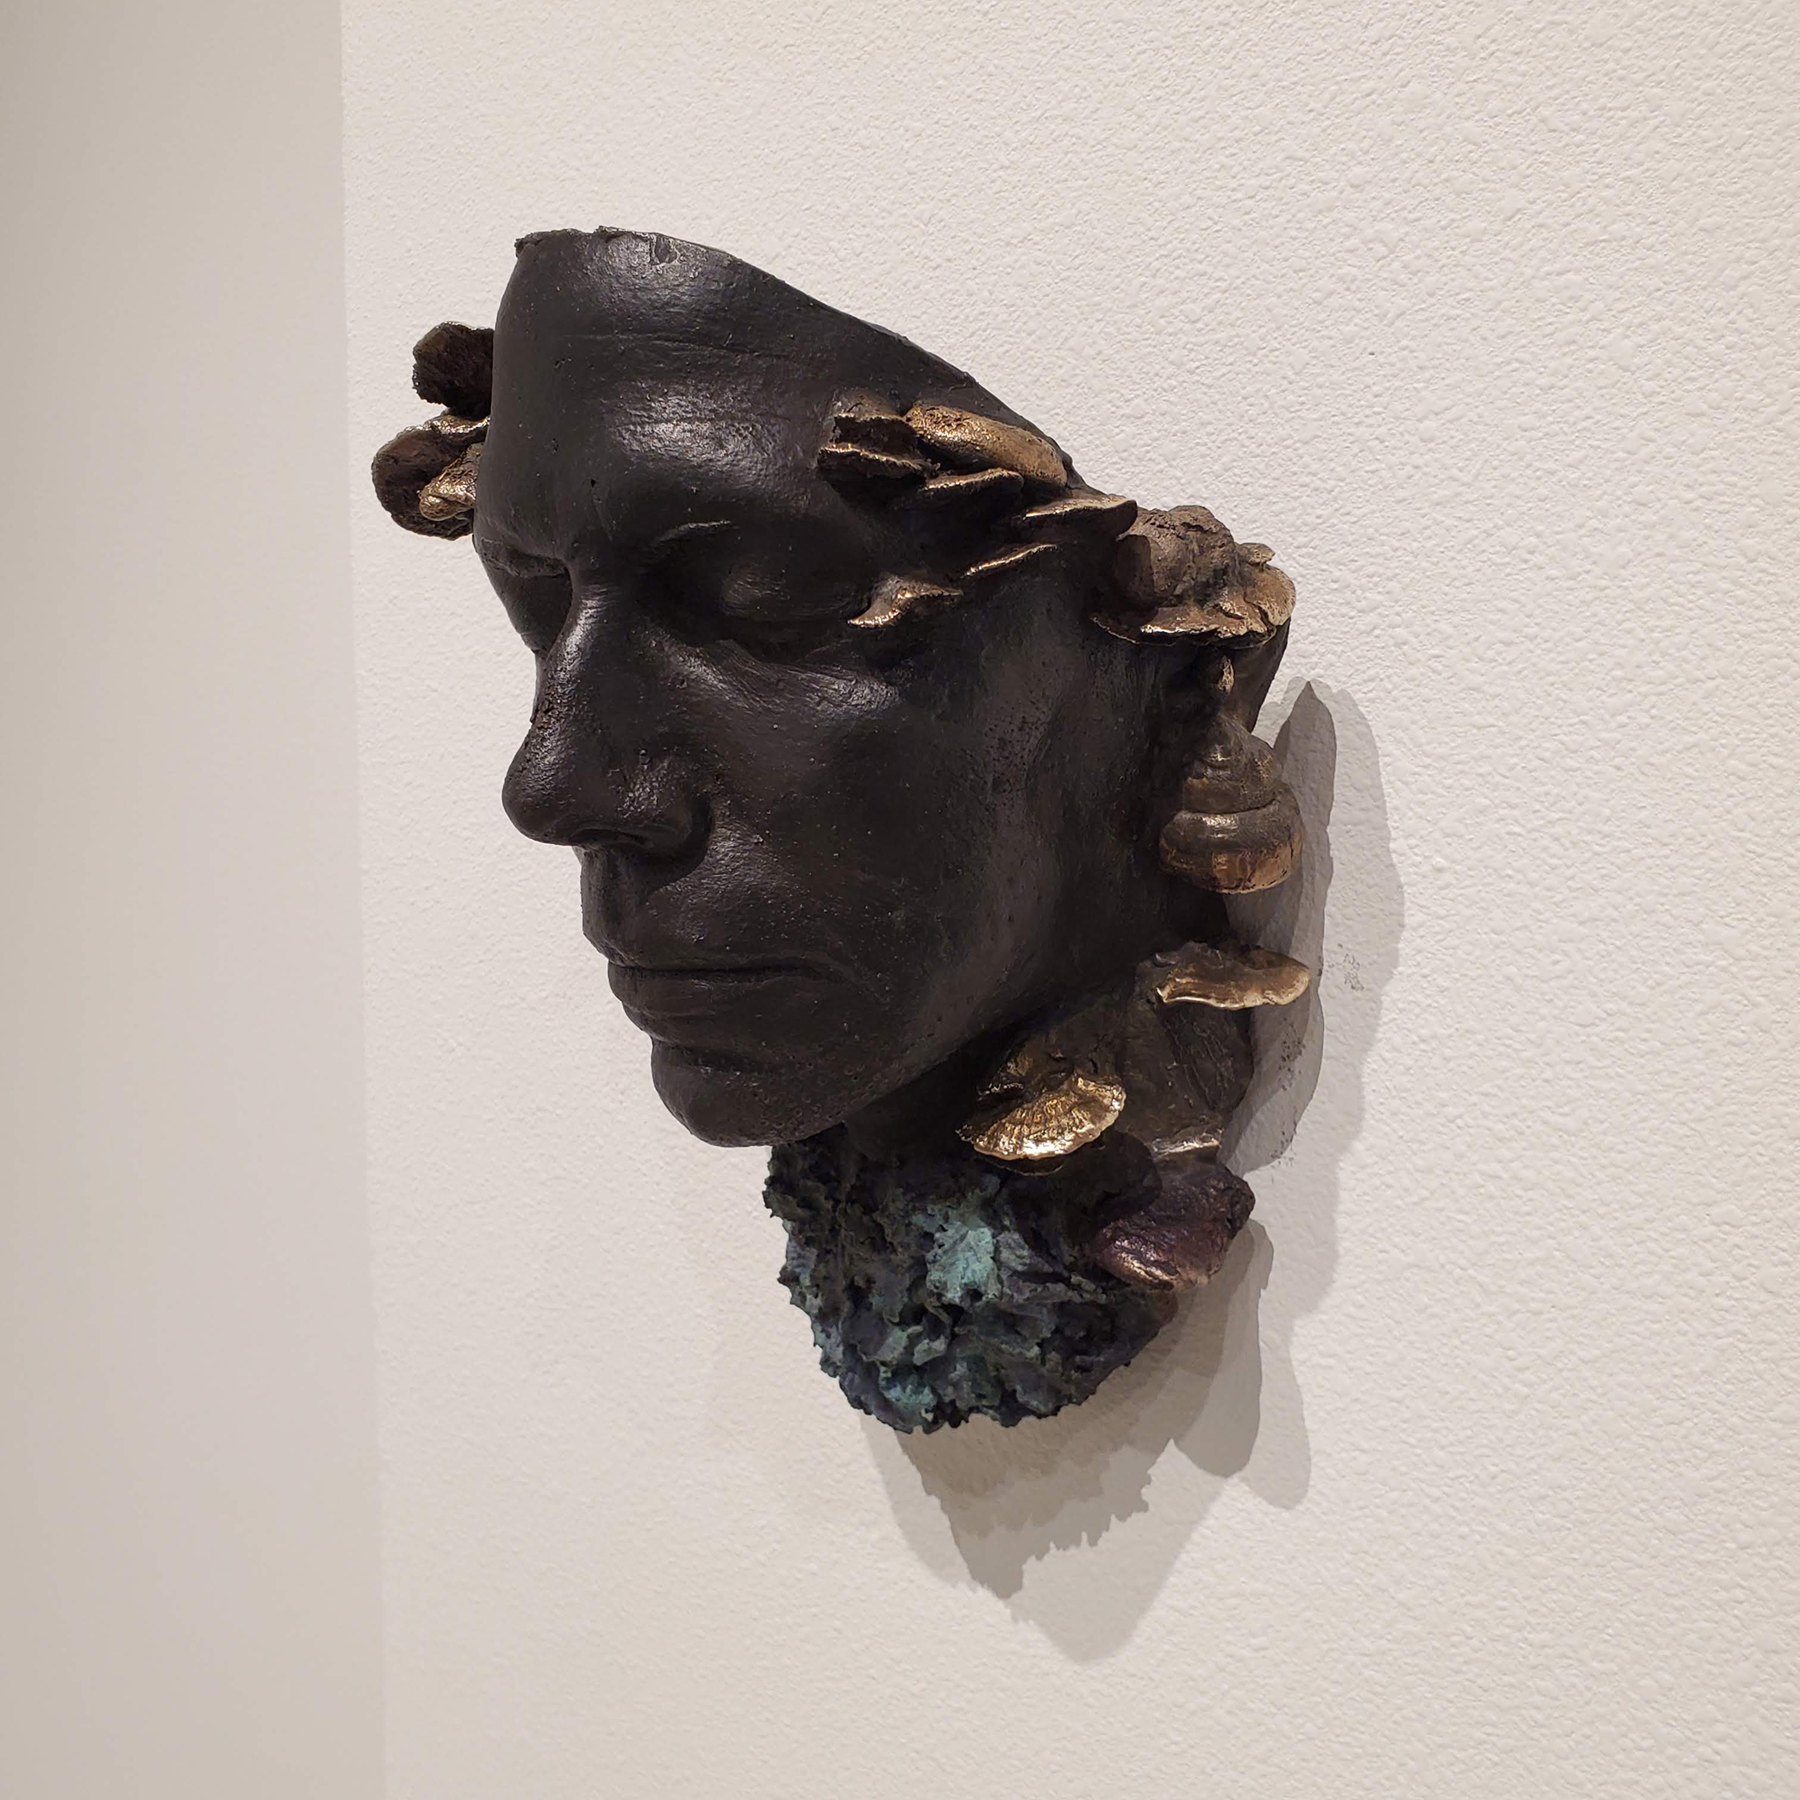 Face mask with lichen and fungus cast in bronze by Christen Booth. Image courtesy of the artist